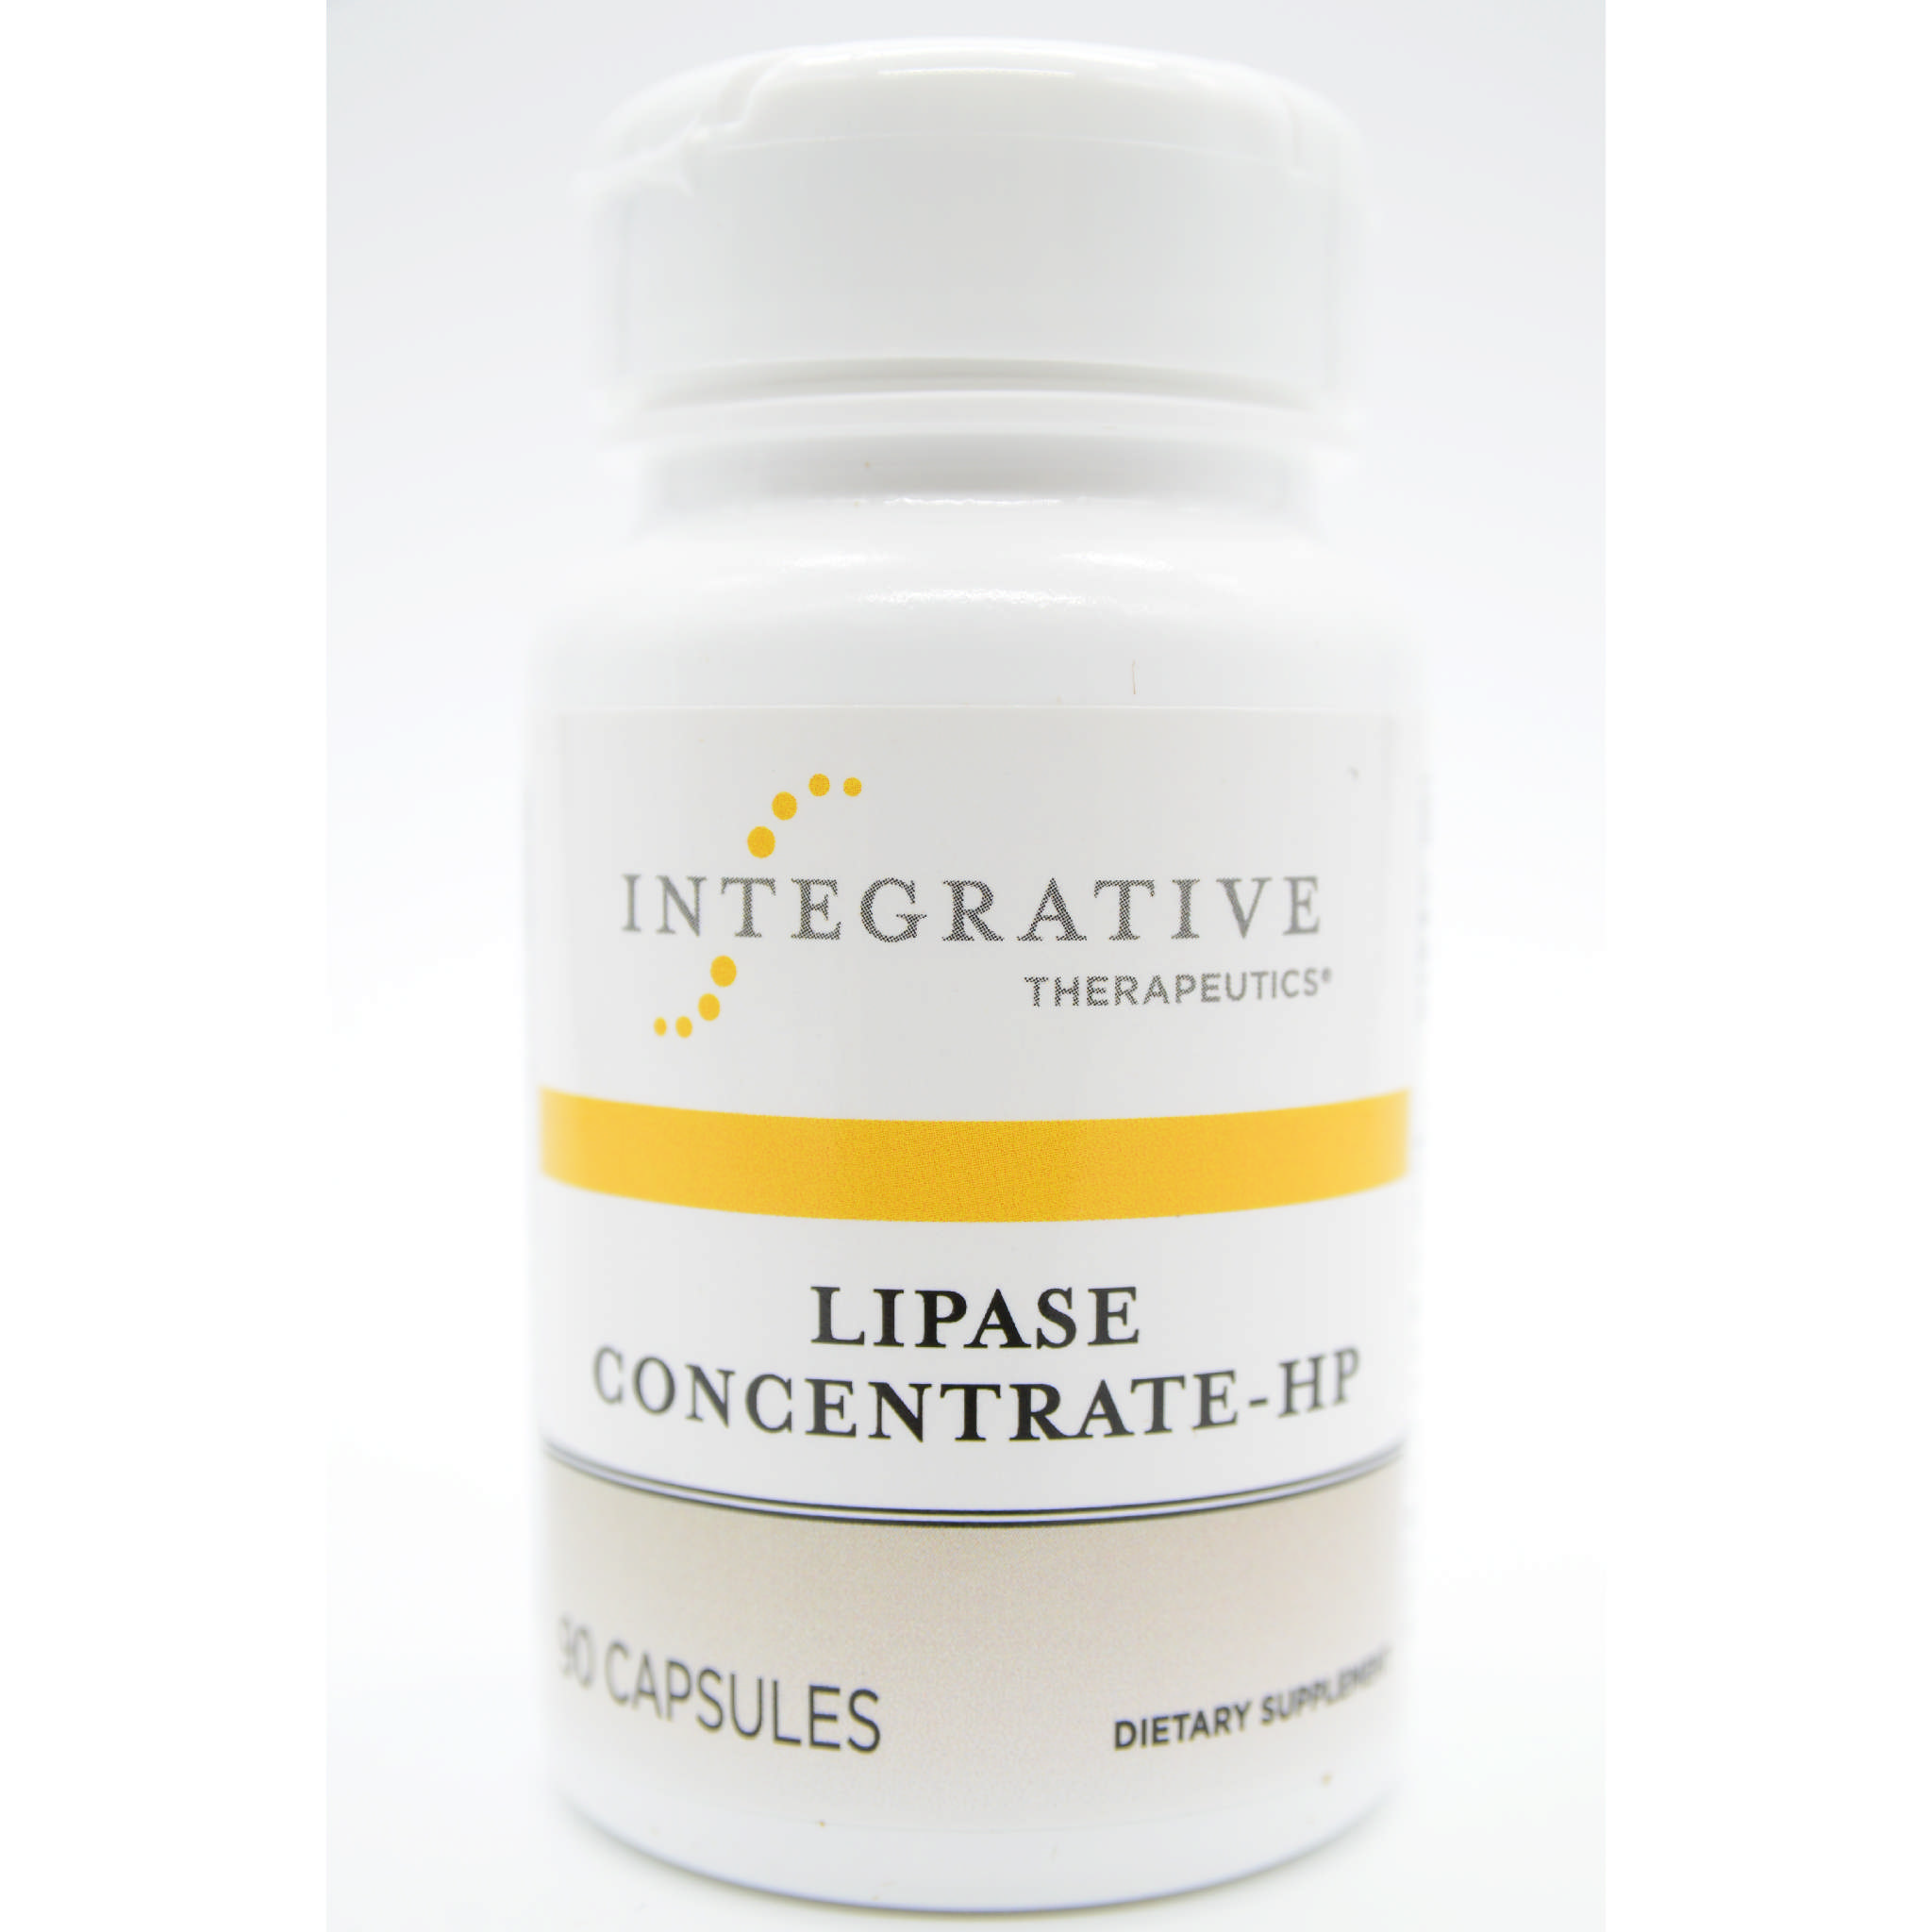 Integrative Therapy - Lipase Concentrate Hp